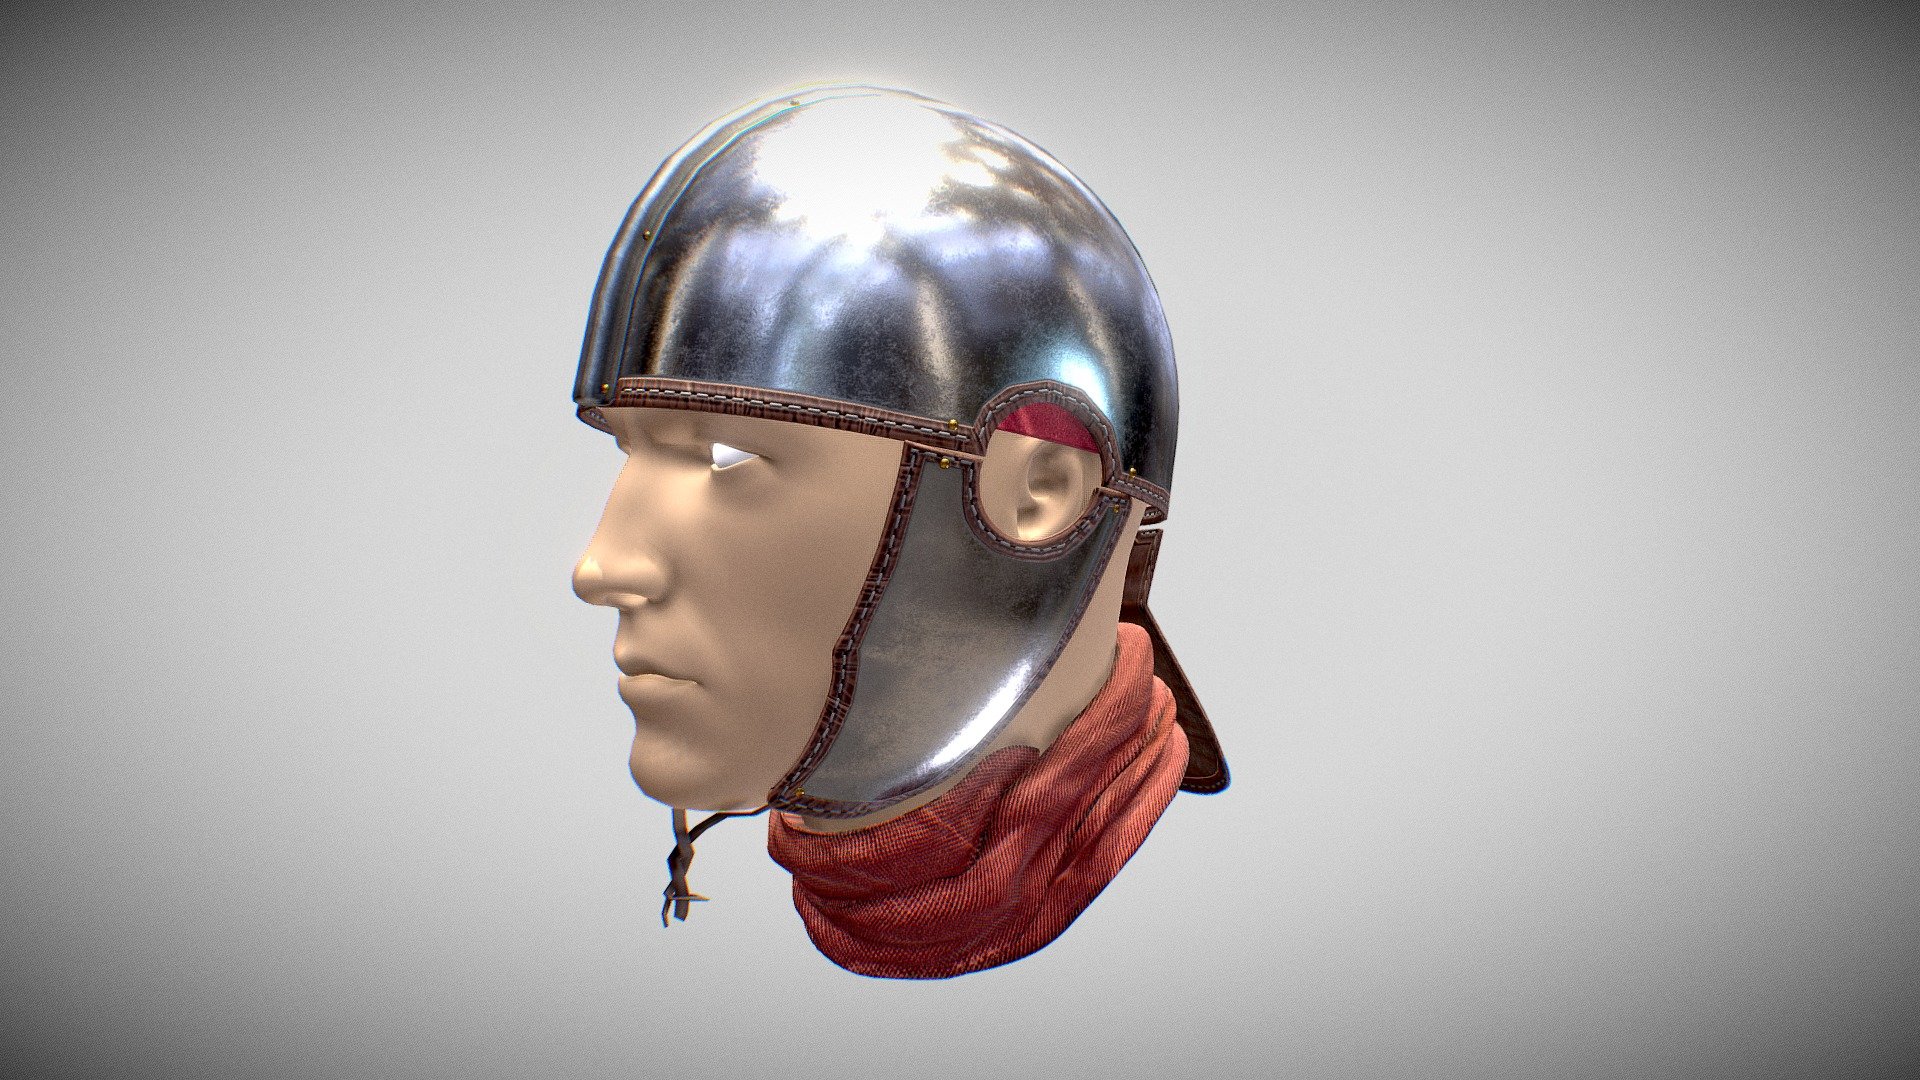 In the late 3rd century, a complete break in Roman helmet design occurred. Previous Roman helmet types, based ultimately on Celtic designs, were replaced by new forms derived from helmets developed in the Sassanid Empire. A closely related form to the Roman ridge helmets is represented by a single helmet from Dura Europos which is of similar construction, but has a much higher-vaulted skull. It probably belonged to a Sassanid warrior of the 3rd century. This reinforces the evidence for a Sassanid origin of this type of helmet. Two main forms of helmet construction were adopted by the Romans at much the same time: the ridge helmet, described here, and the Spangenhelm, which was likely adopted from the Sarmatians. The earliest confirmed example of a Late Roman ridge helmet is the Richborough helmet, which dates to about 280 AD

Source: https://magister-militum.co.uk/blog/intercisa-helmets - Late Roman Ridge Helmet "Intercisa I" - 3D model by Davicolt 3d model